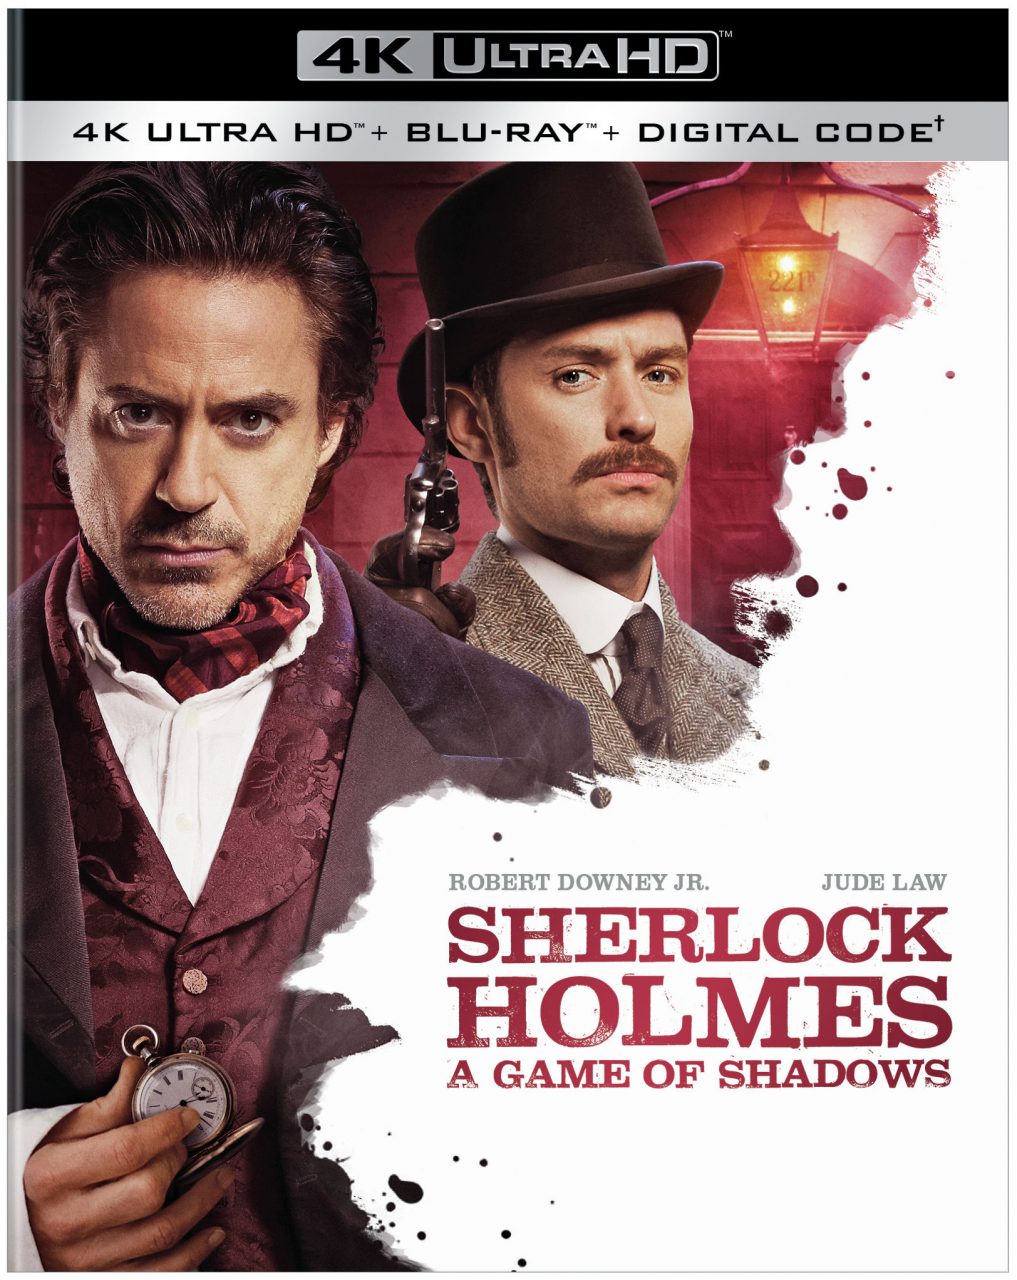 Sherlock Holmes: A Game Of Shadows 4K Ultra HD Combo Pack cover (Warner Bros. Home Entertainment)